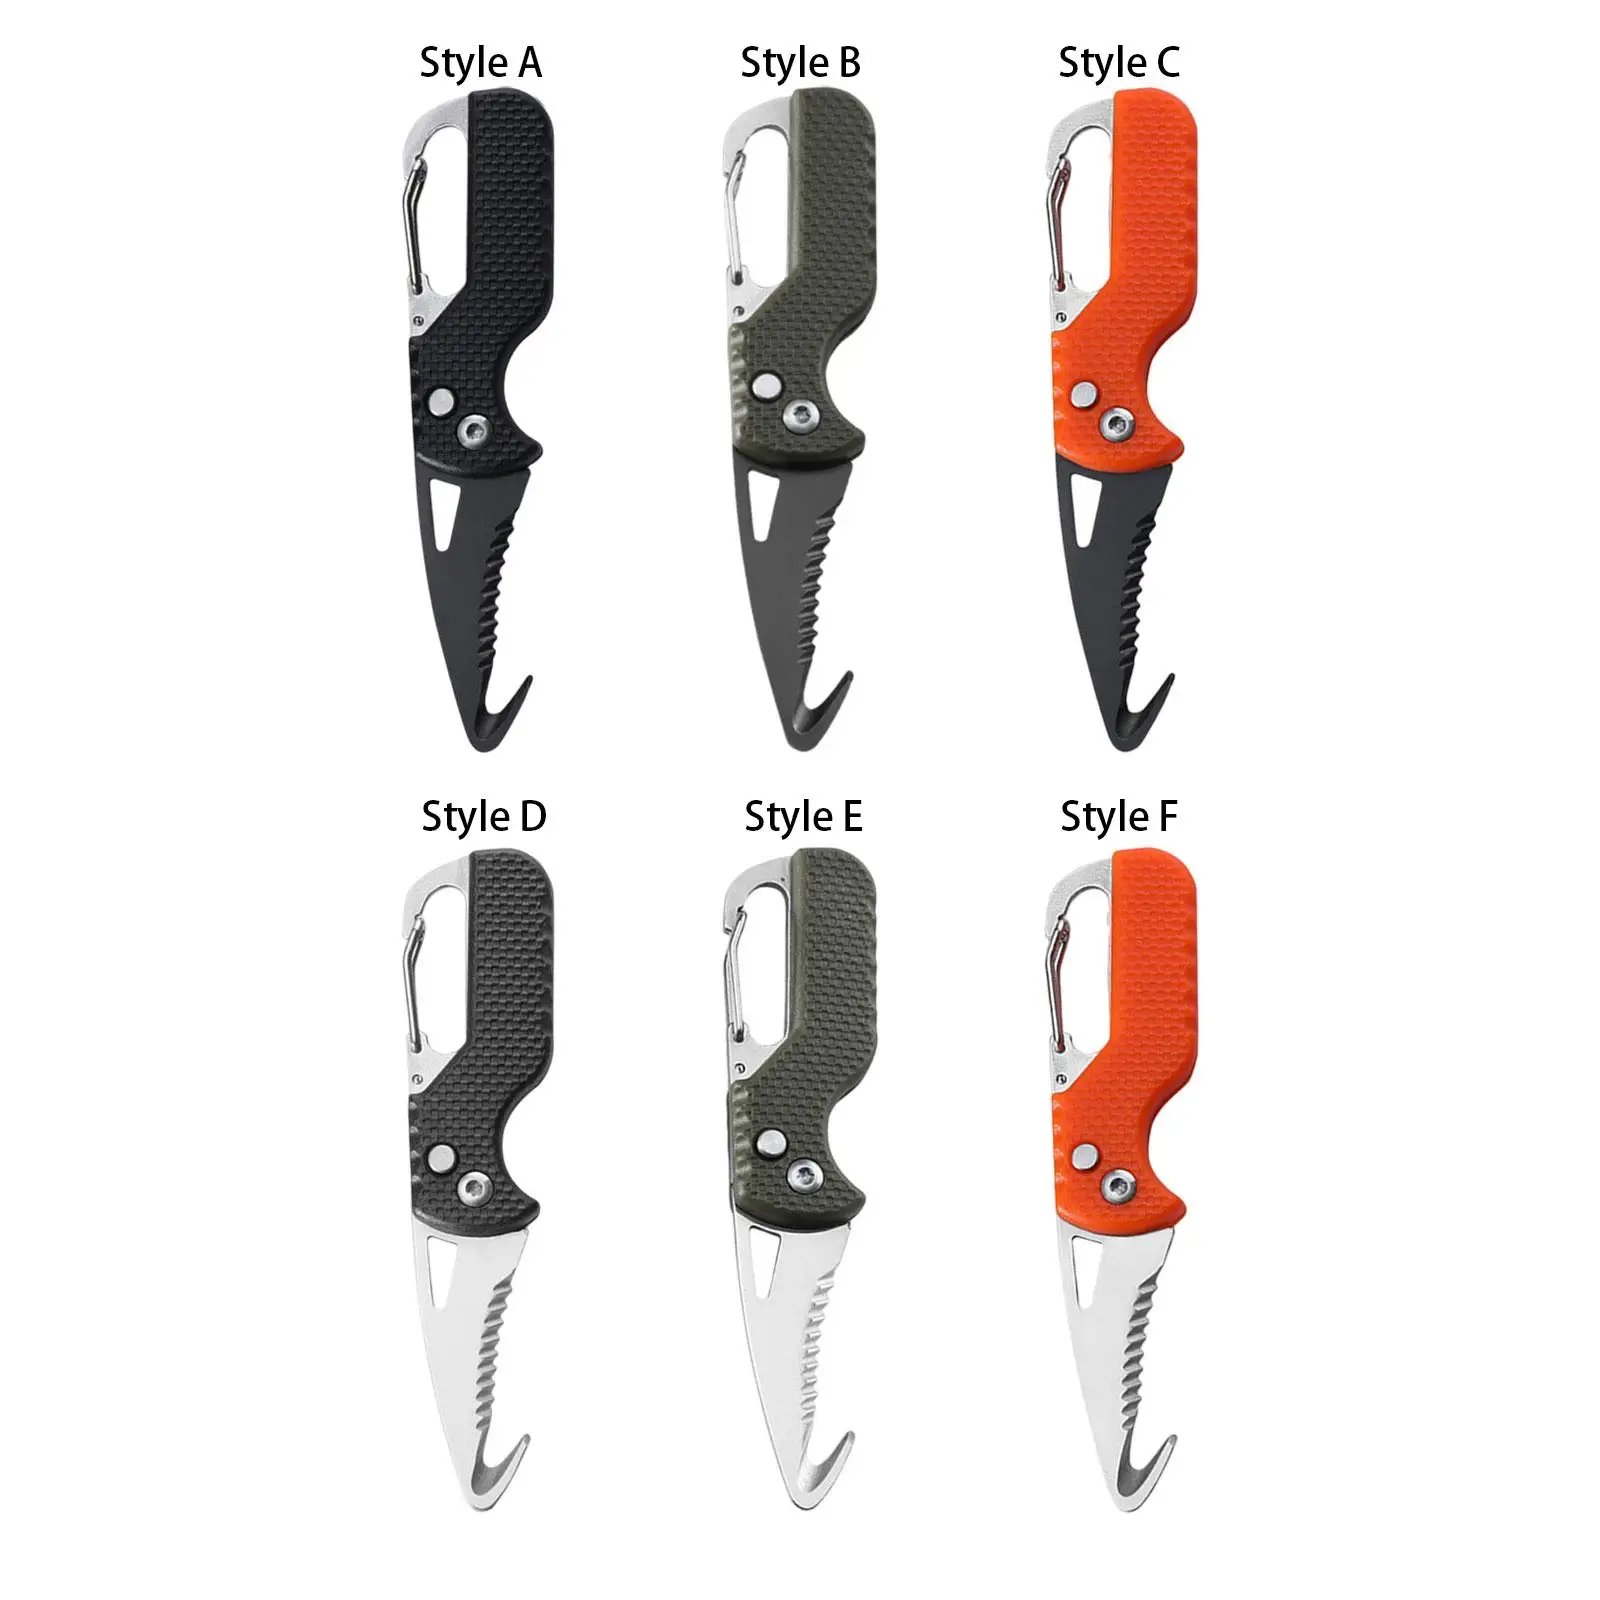 Bottle Opener Durable Utility Tool Multifunctional Tool Mini Box Cutter Foldable Cutter for Survival Camping Fishing Outdoor